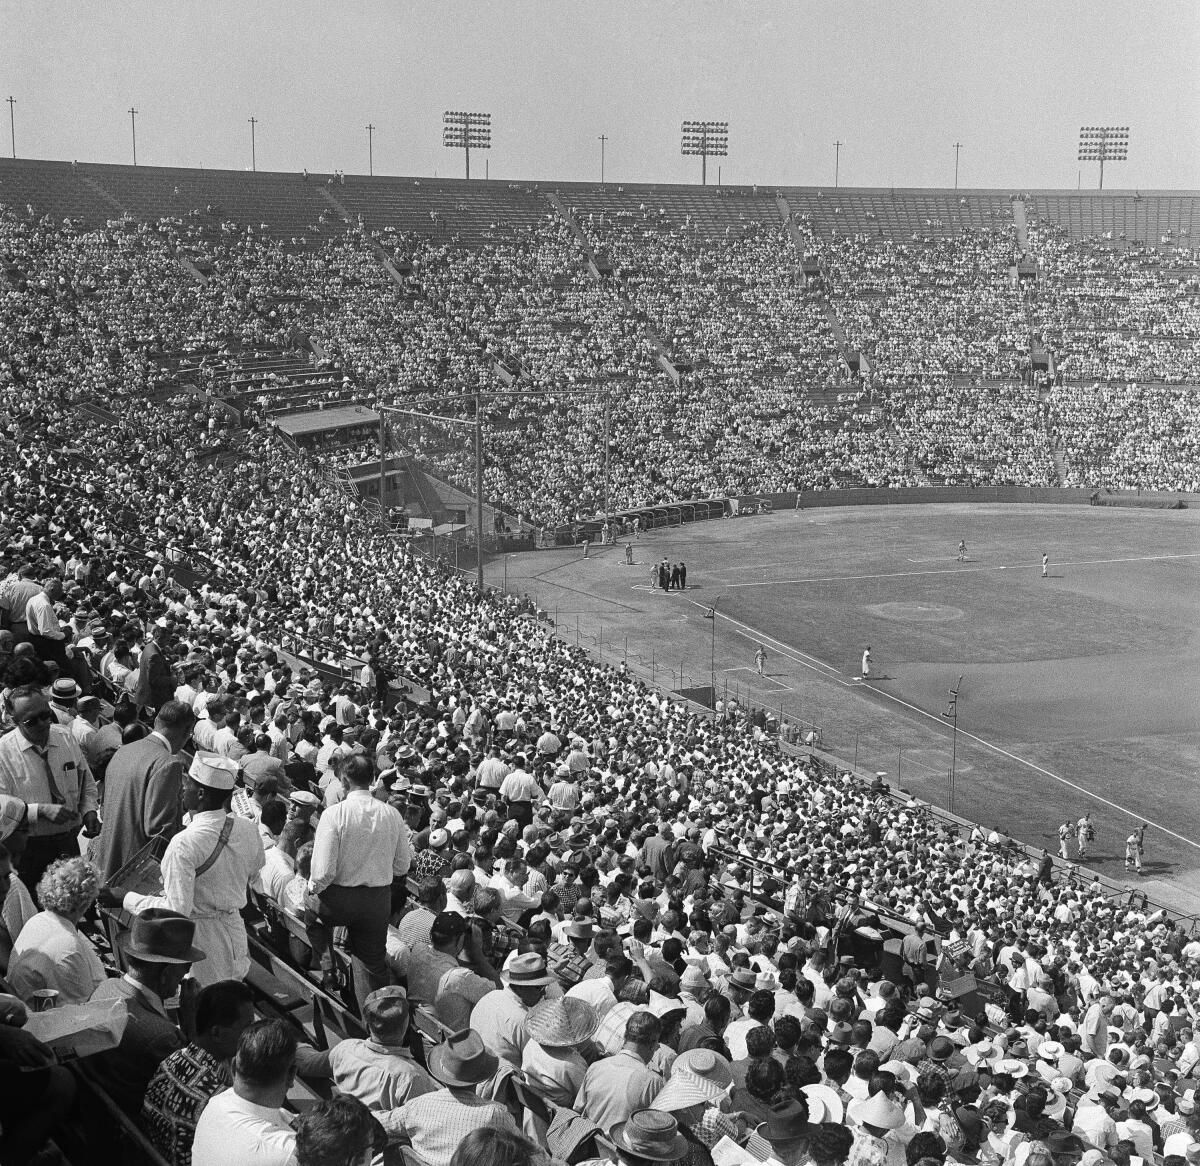 Fans take their seats at the Coliseum before Game 2 of the 1959 tiebreaker series between the Dodgers and Milwaukee Braves.